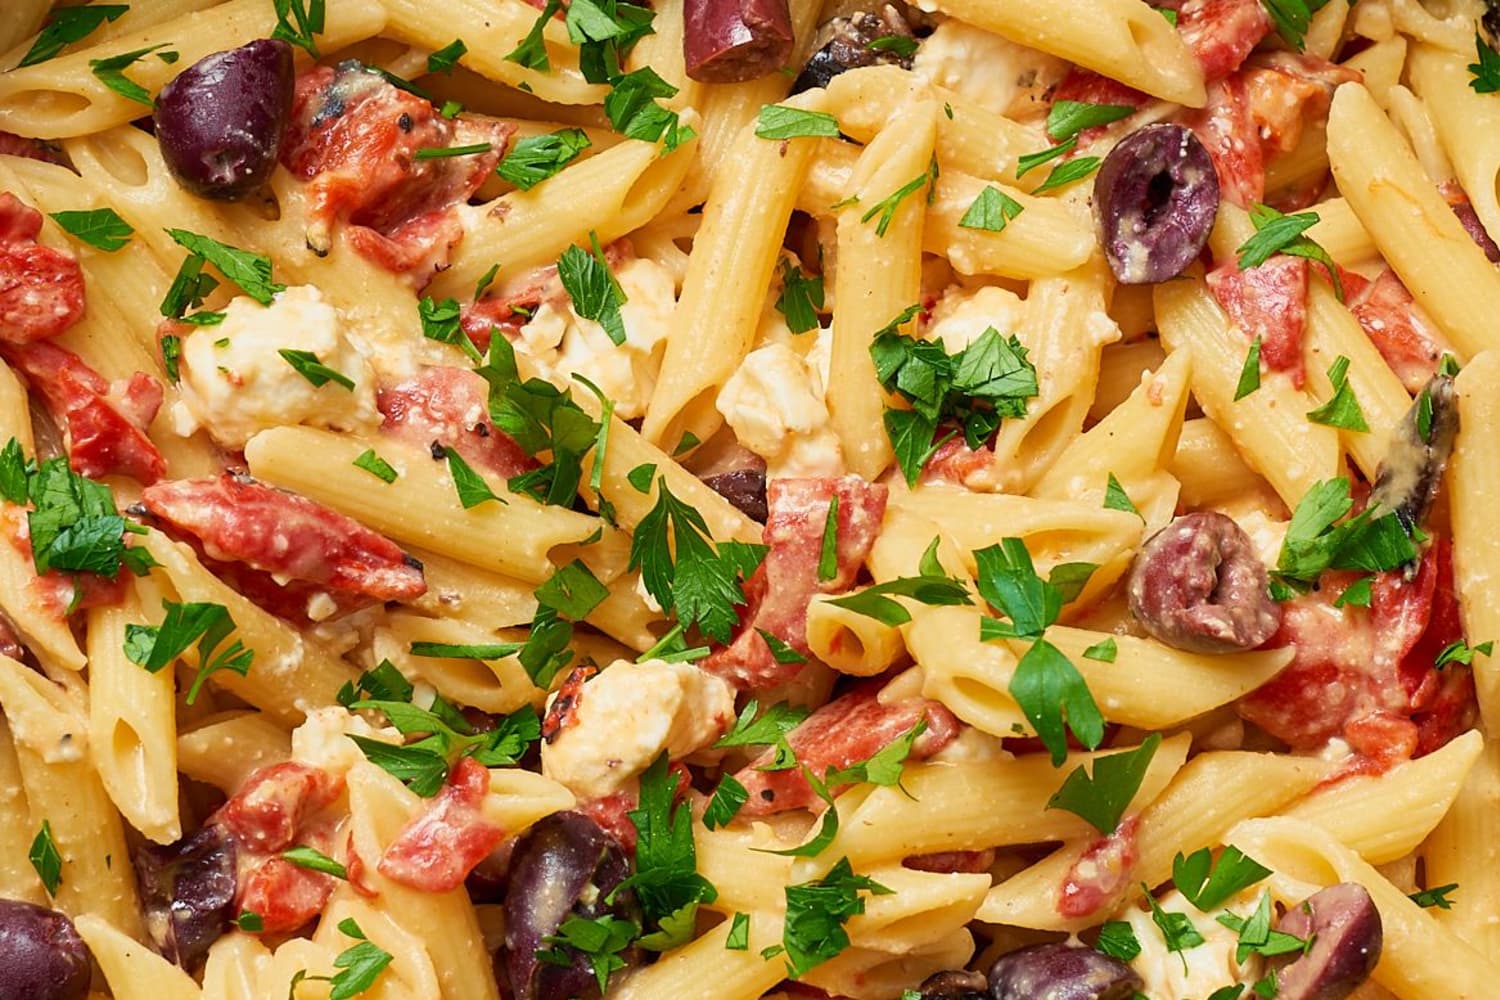 Why I’ll Never Use Penne to Make Pasta Salad Again | The Kitchn